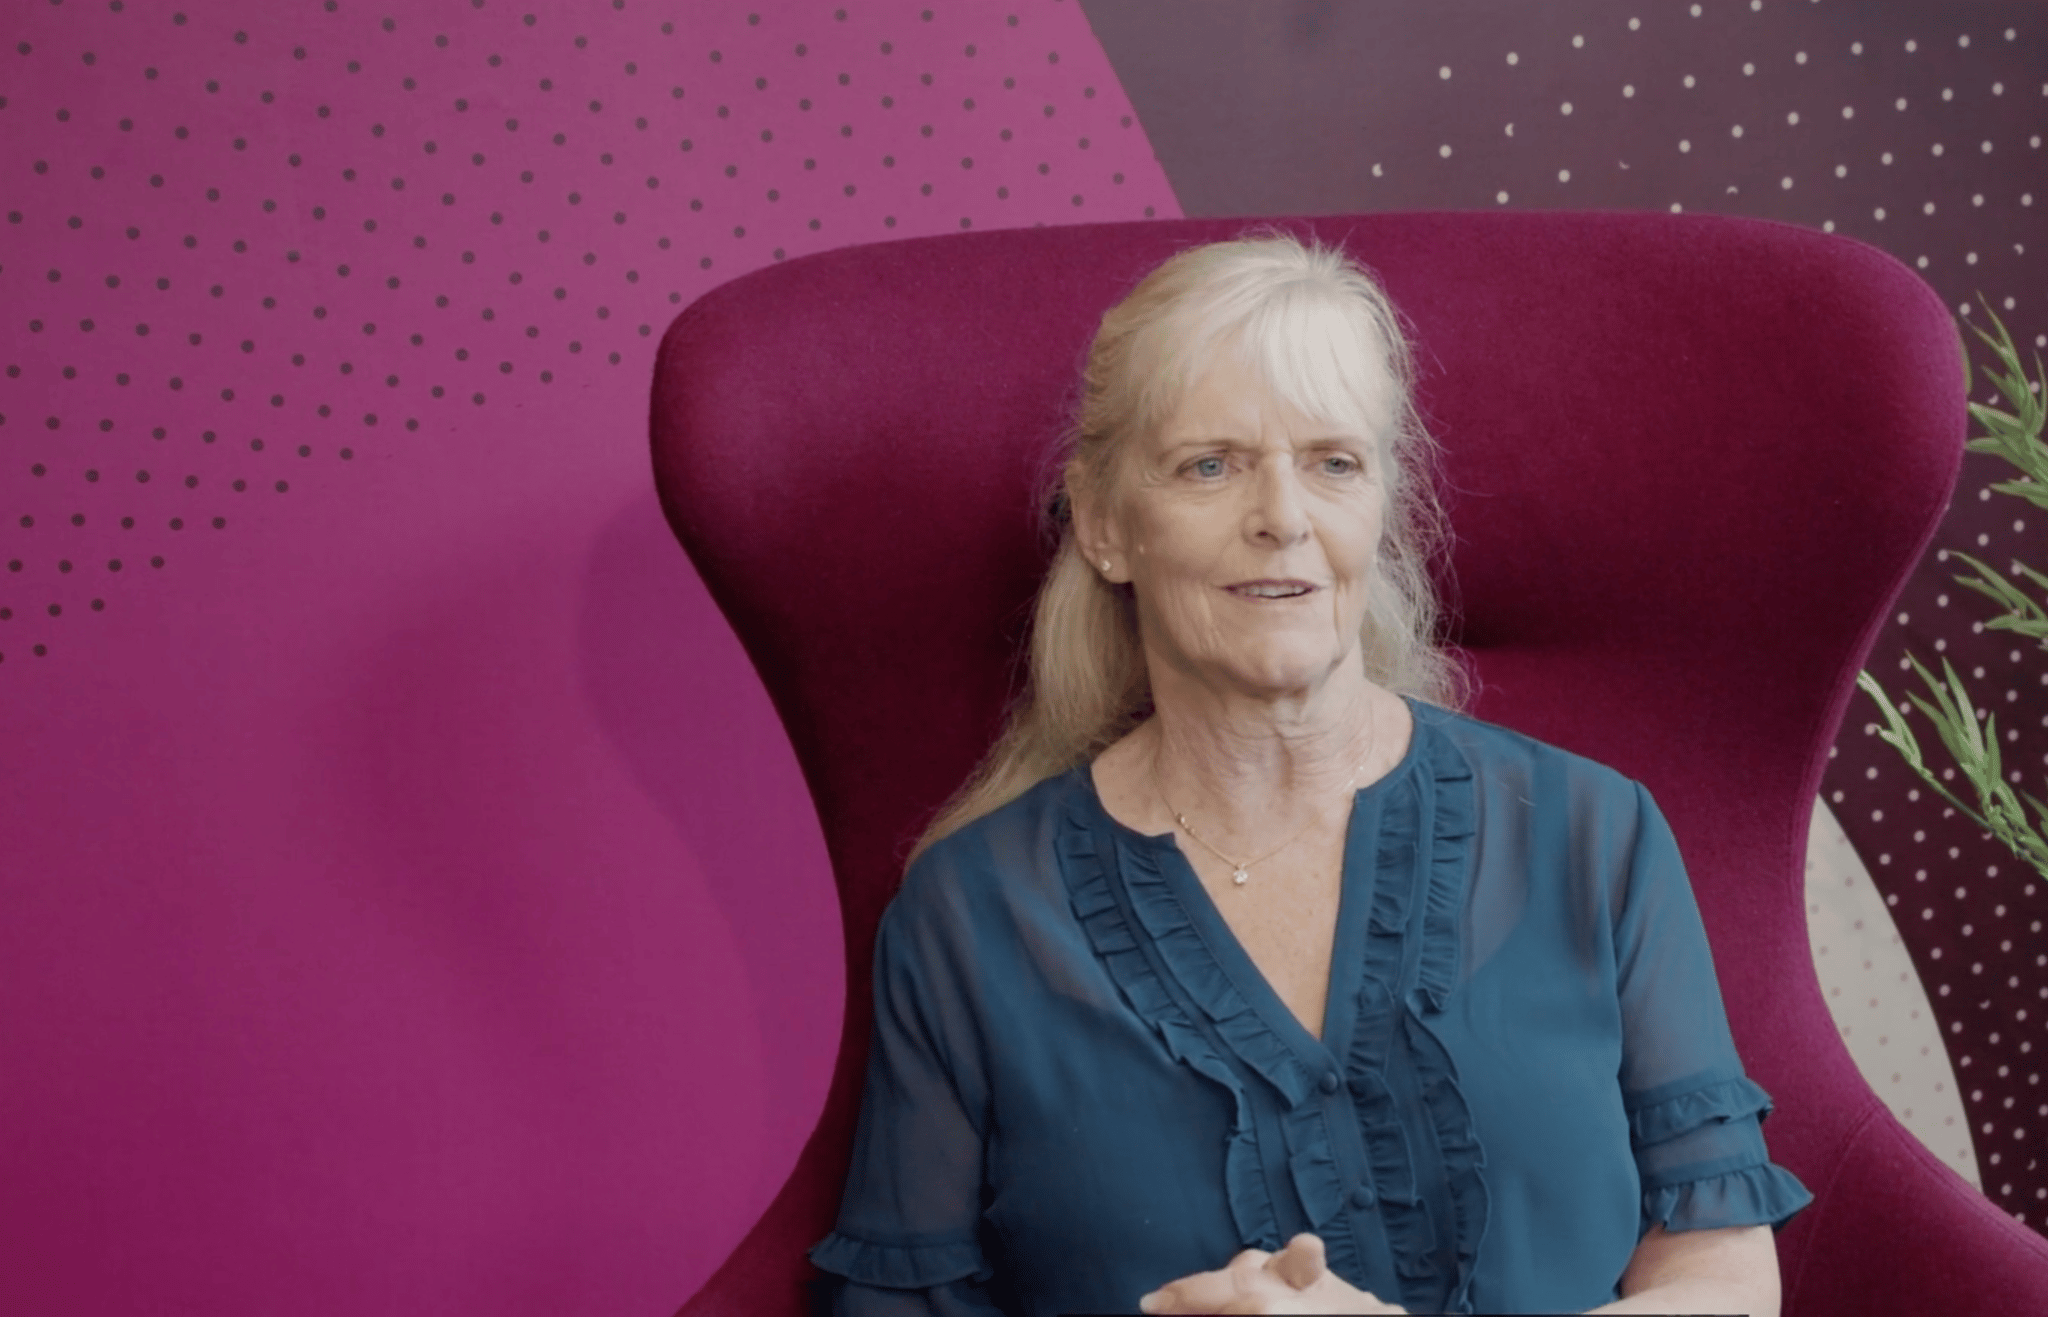 Melanie Lee, CEO, on a pink chair in a pink room